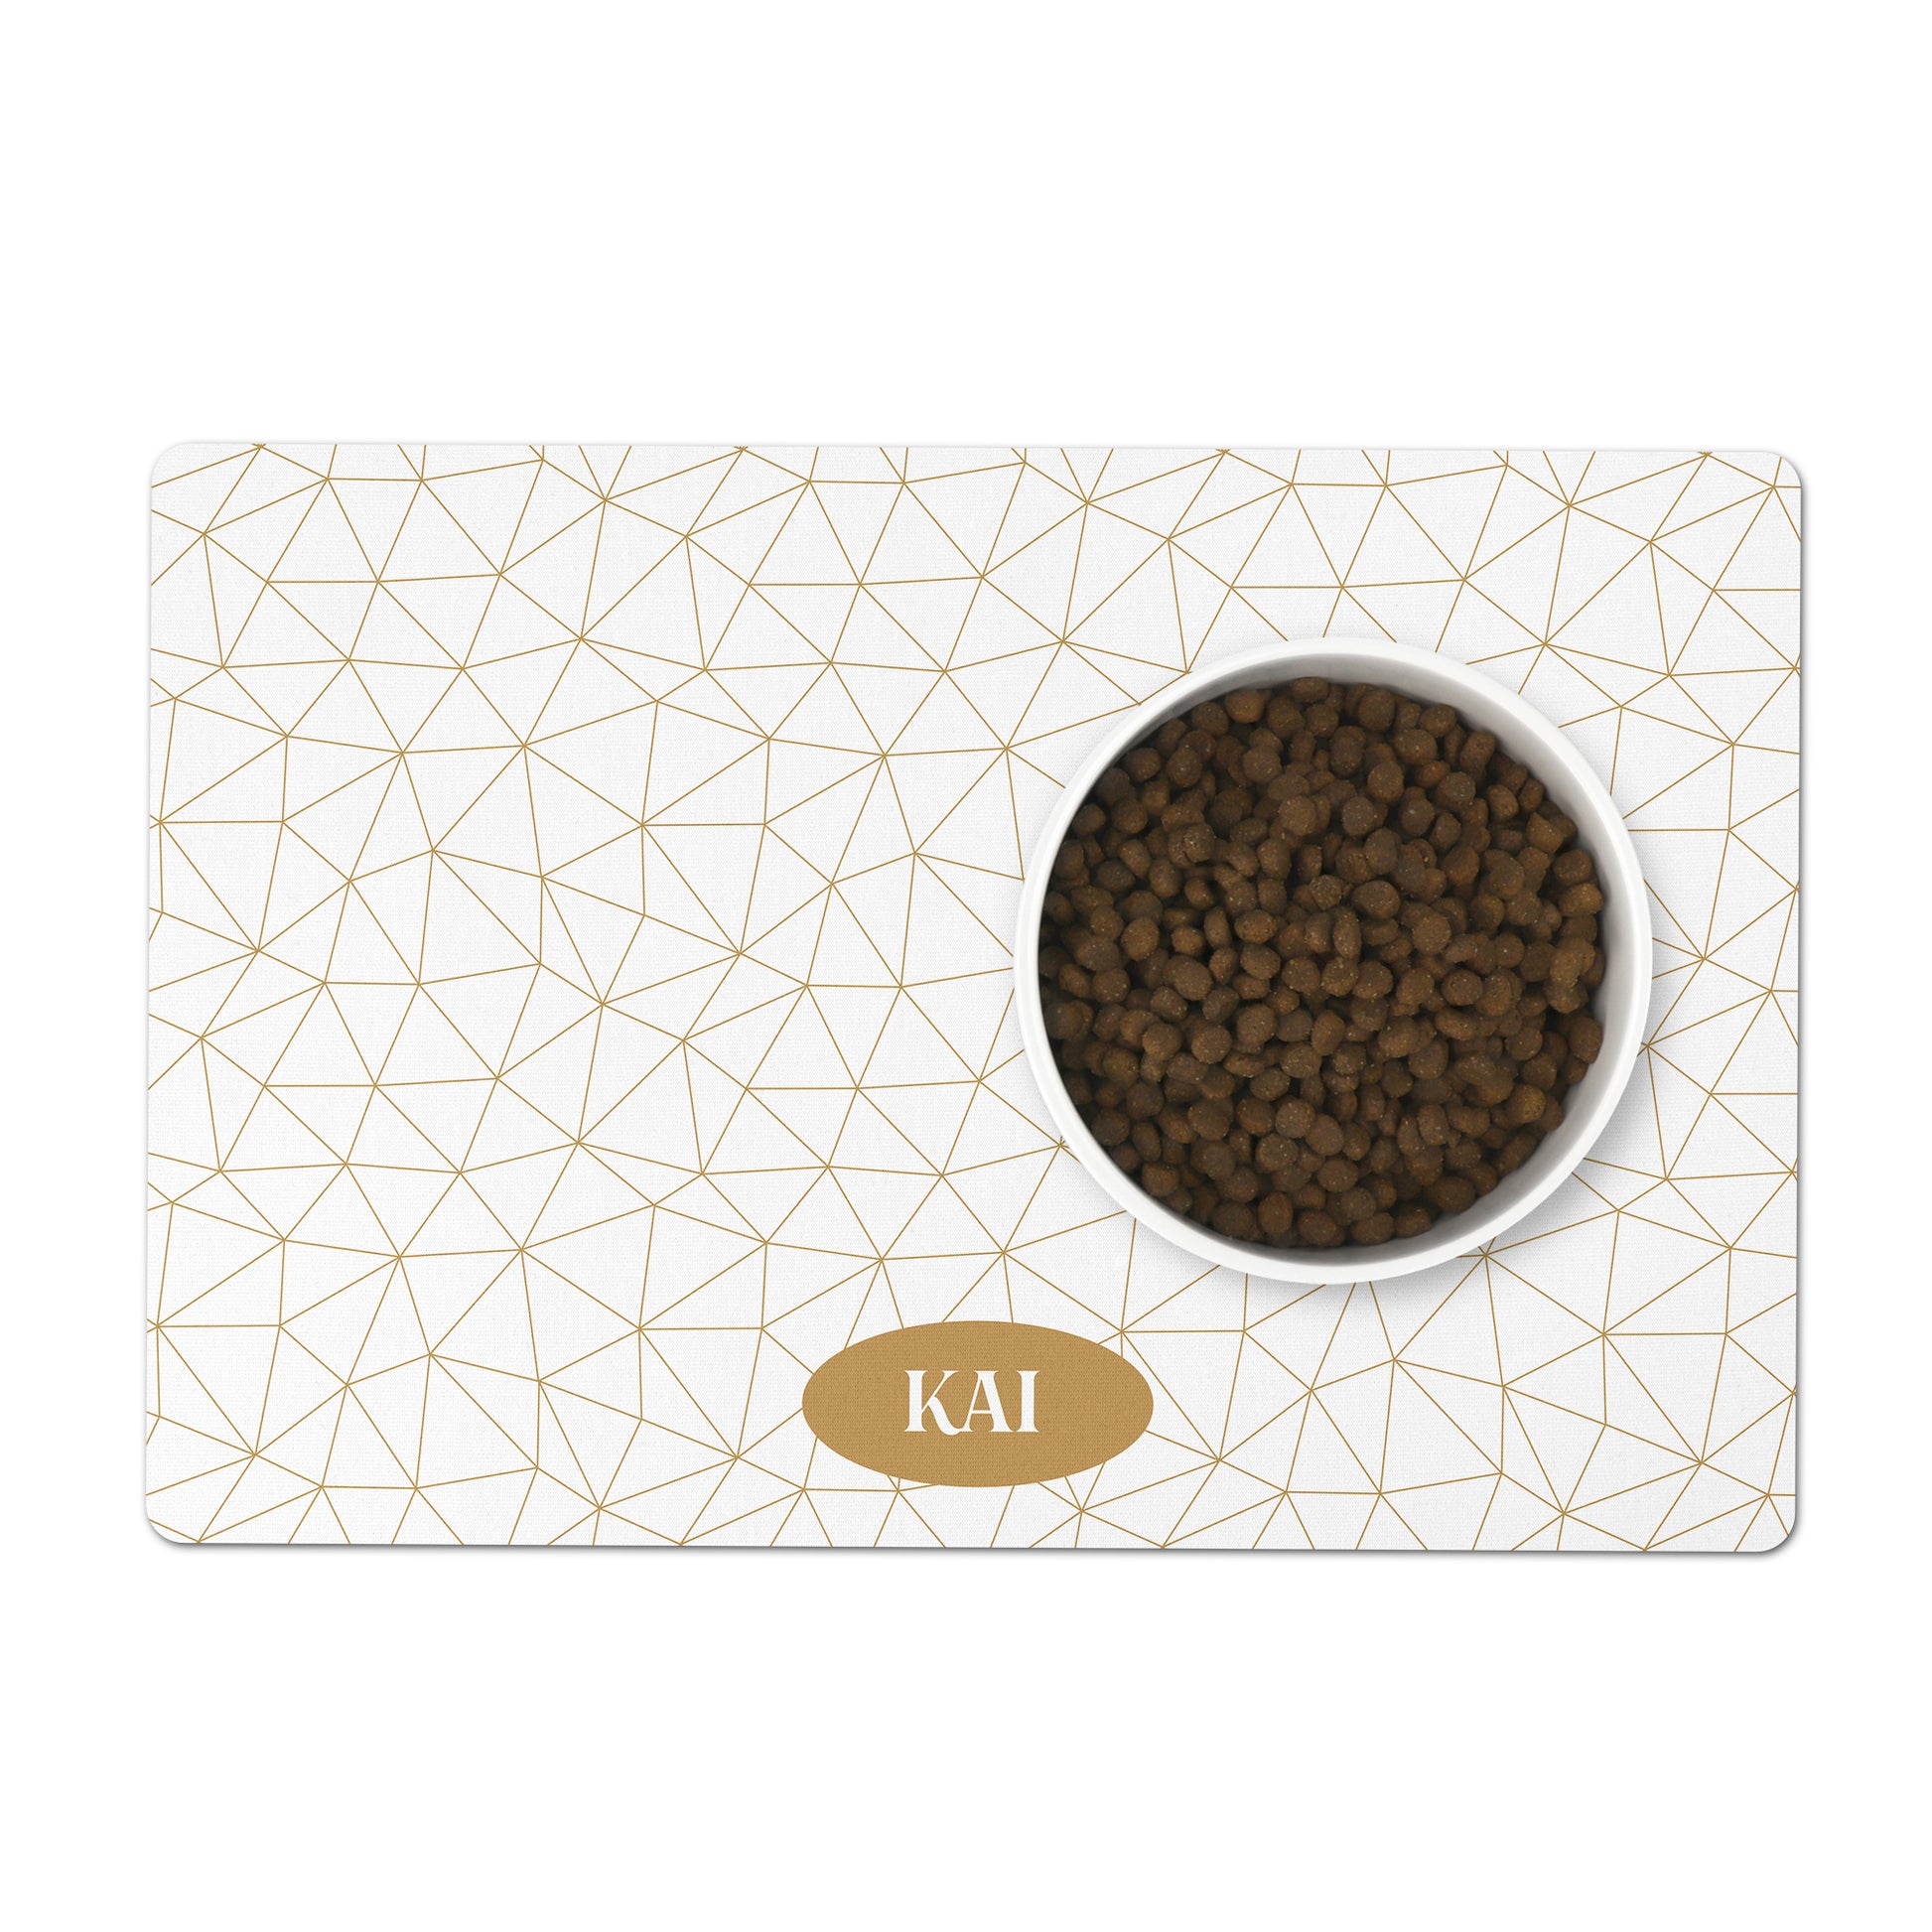 Geometric pattern in gold and white is printed on this modern dog or cat bowl mat and can be personalized with any name or word.